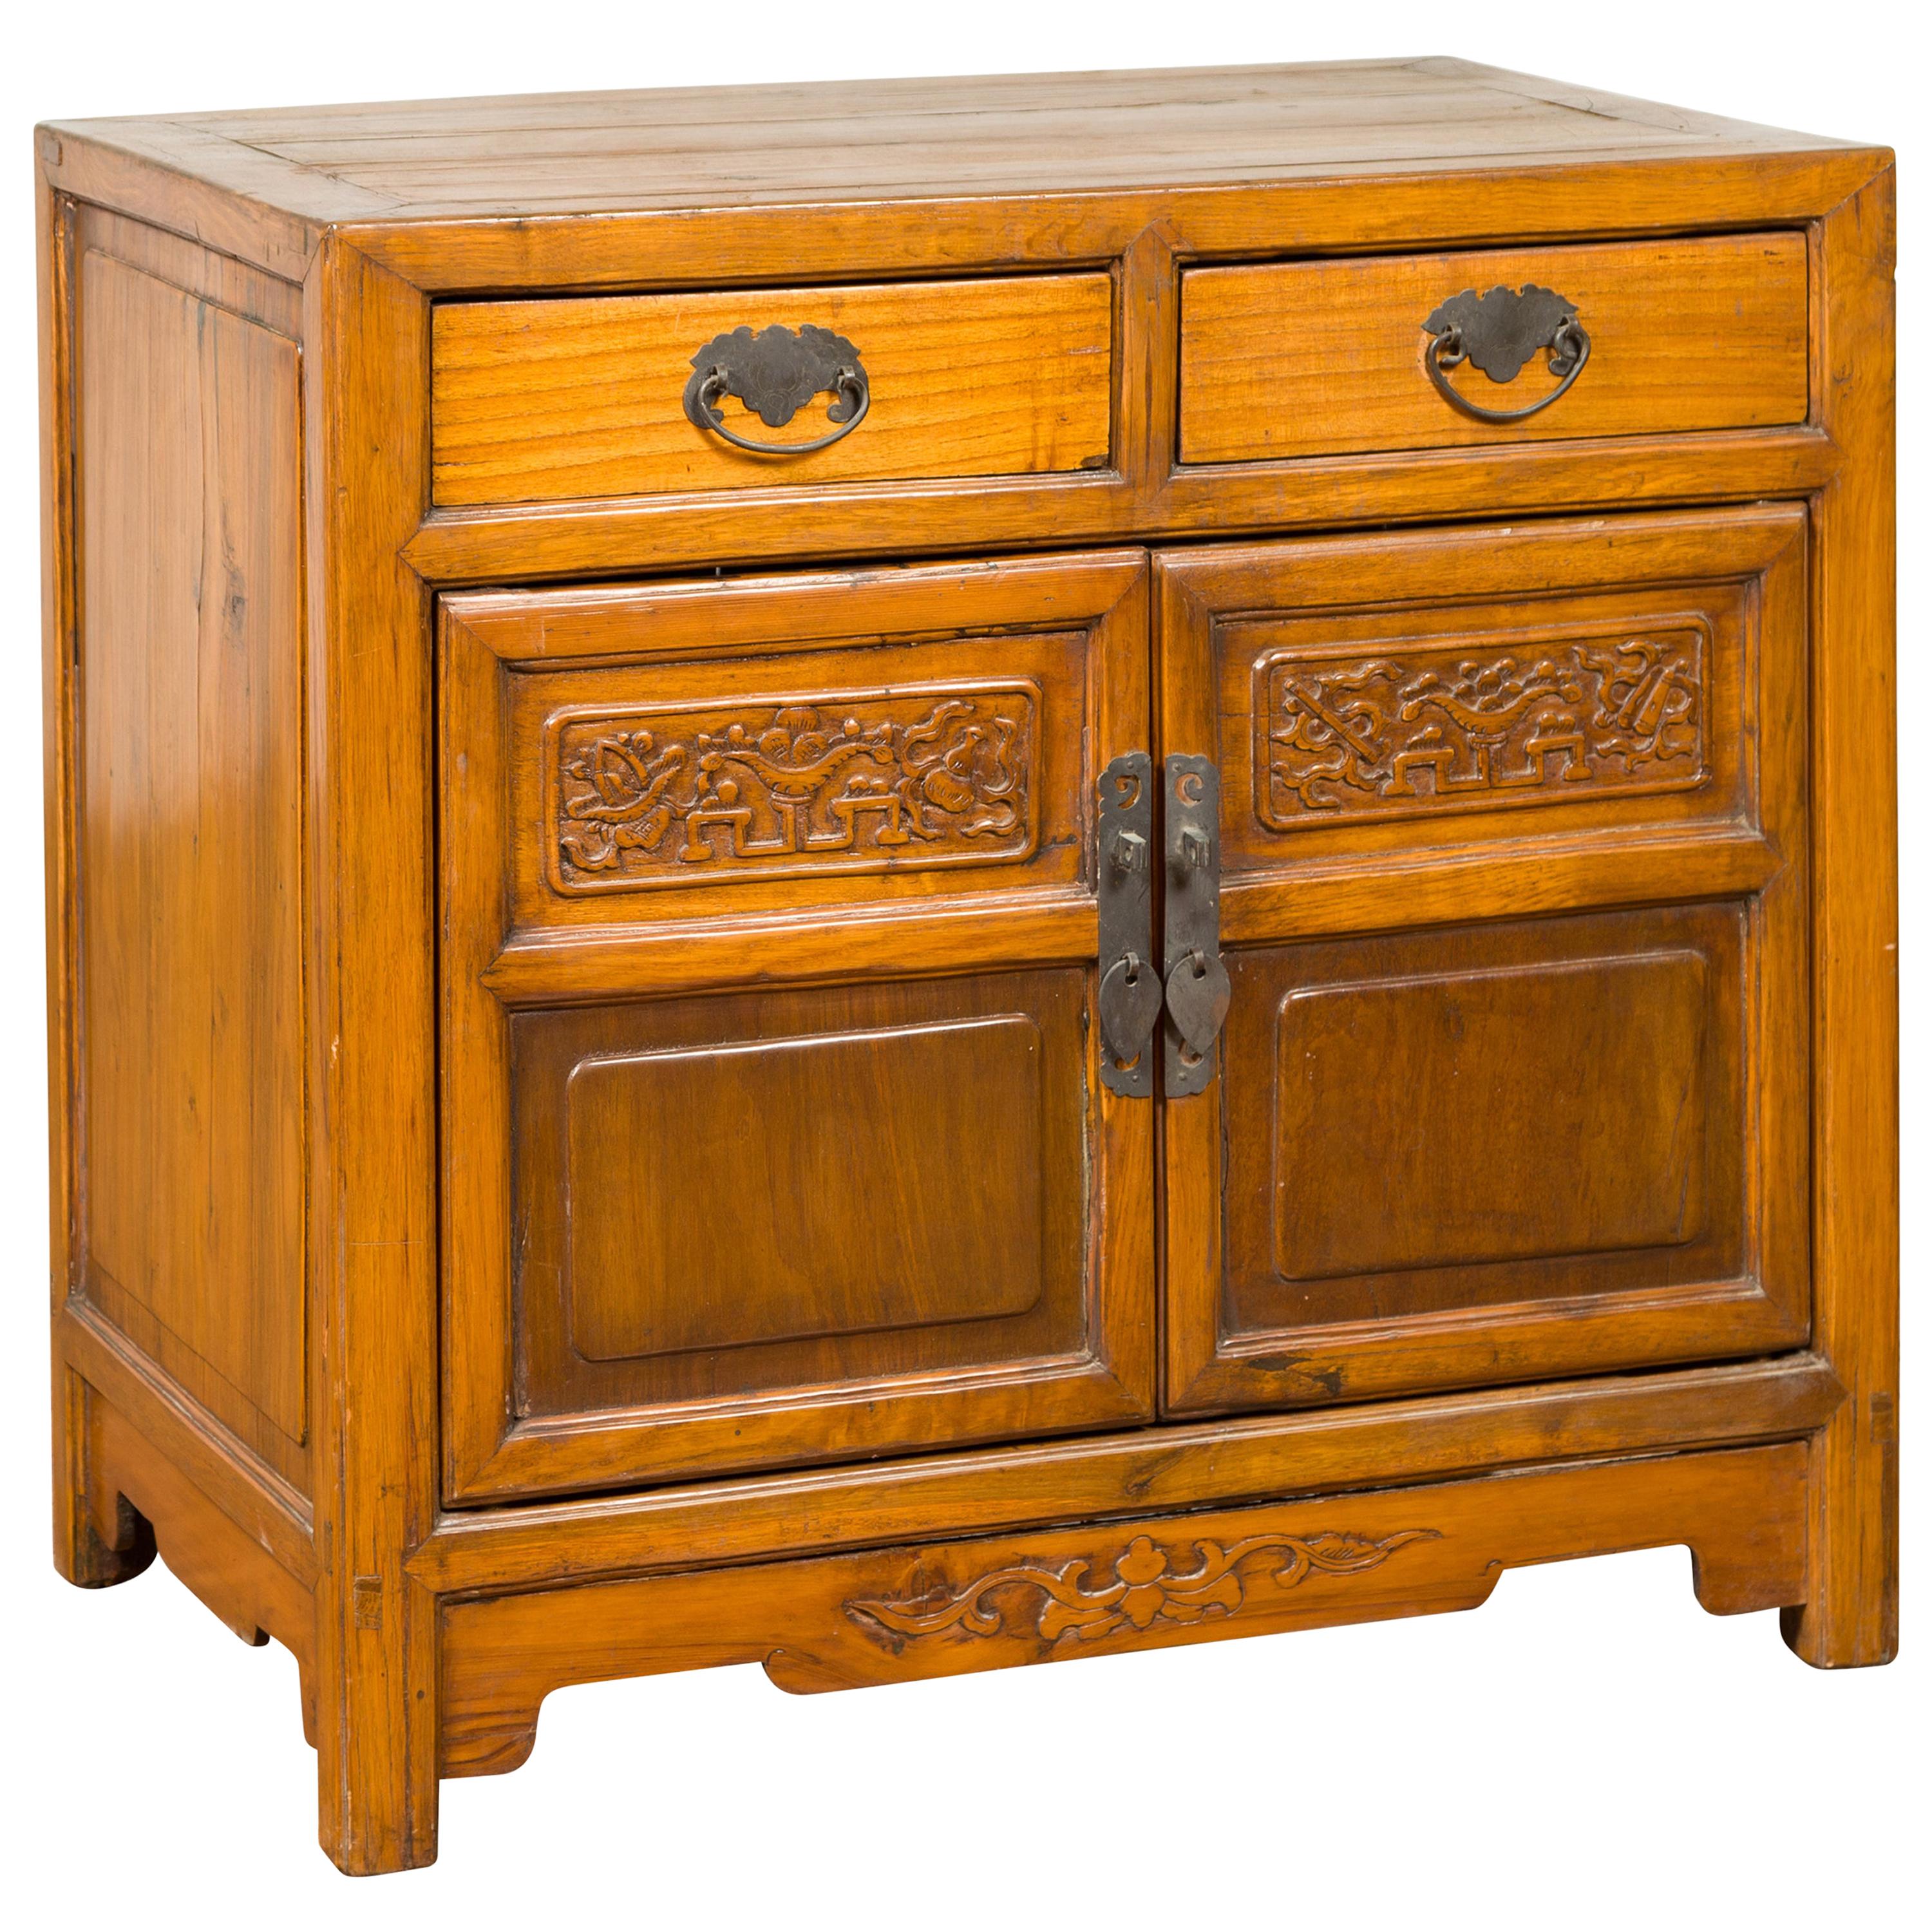 Antique Chinese Side Chest with Carved Motifs, Two Drawers and Double Doors